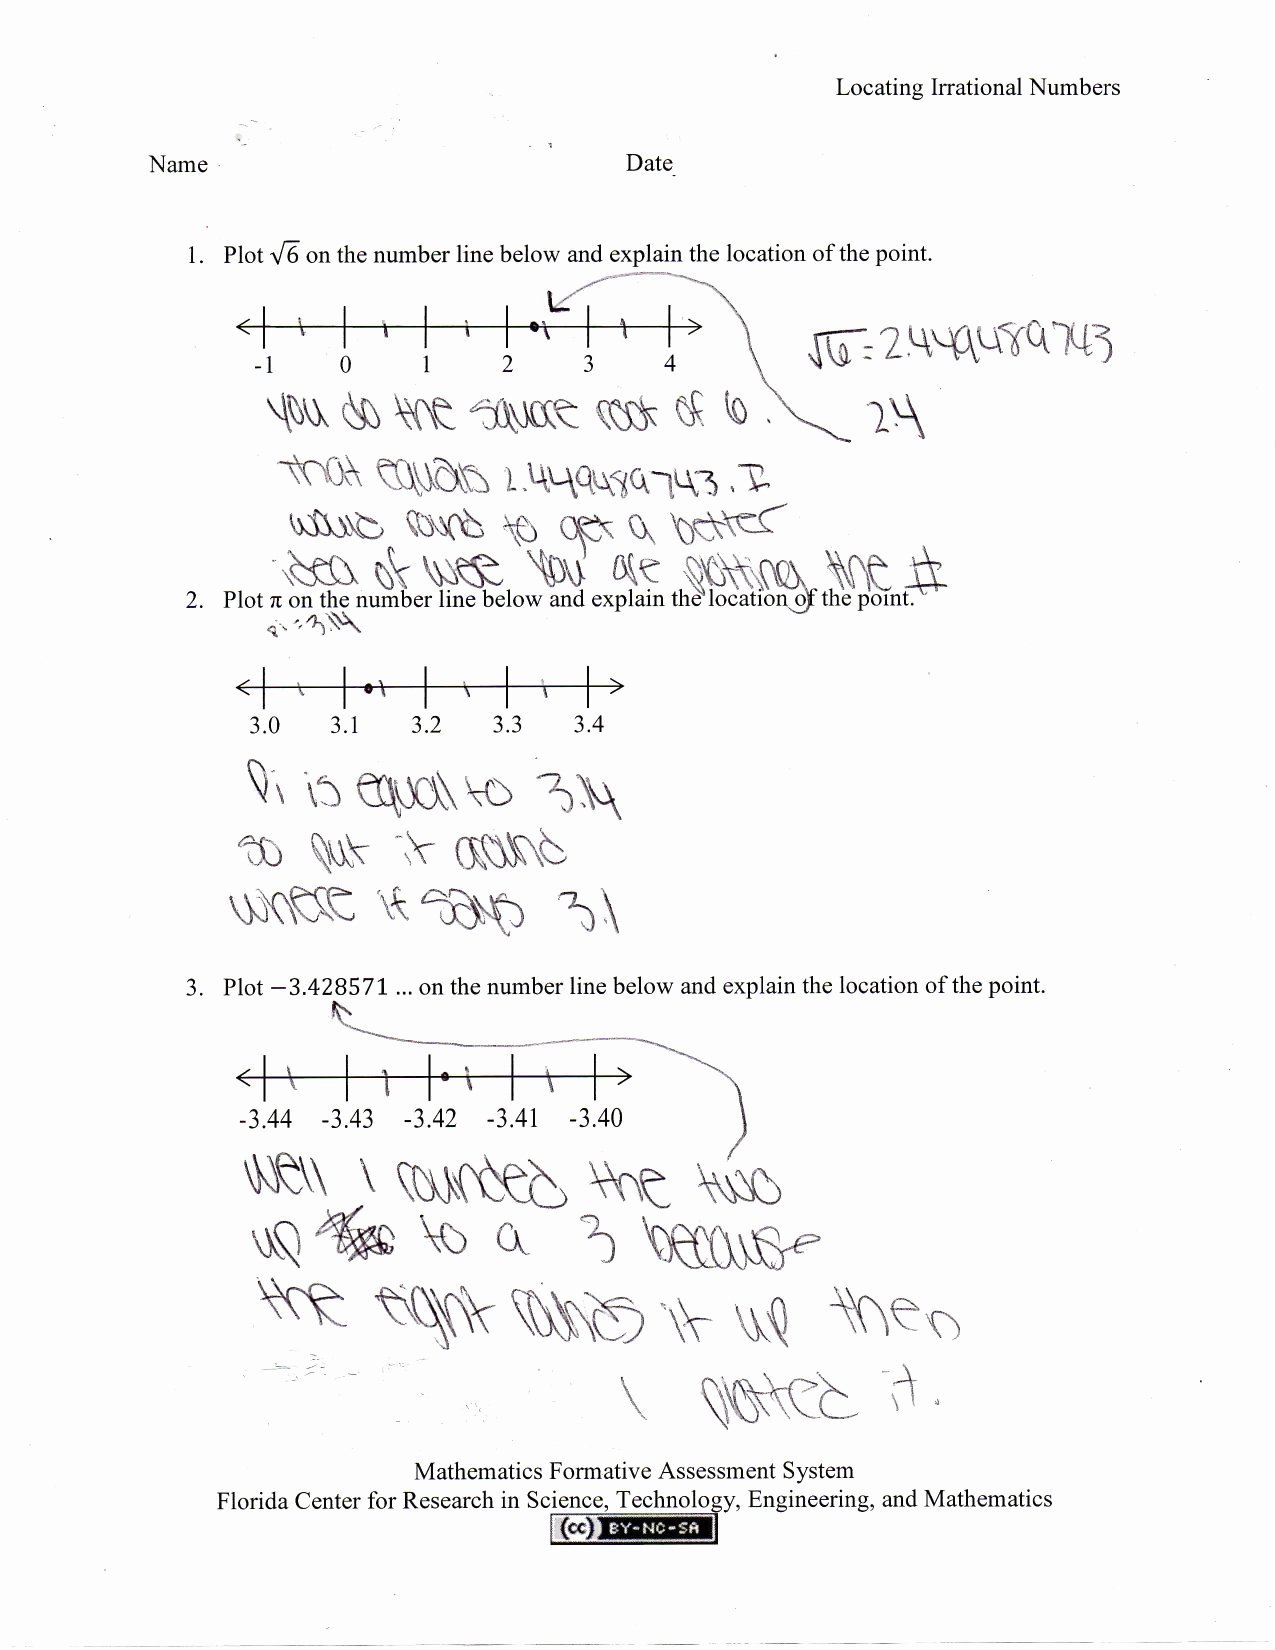 Rational Irrational Numbers Worksheet Awesome Natural whole Integer Rational Irrational Real Numbers